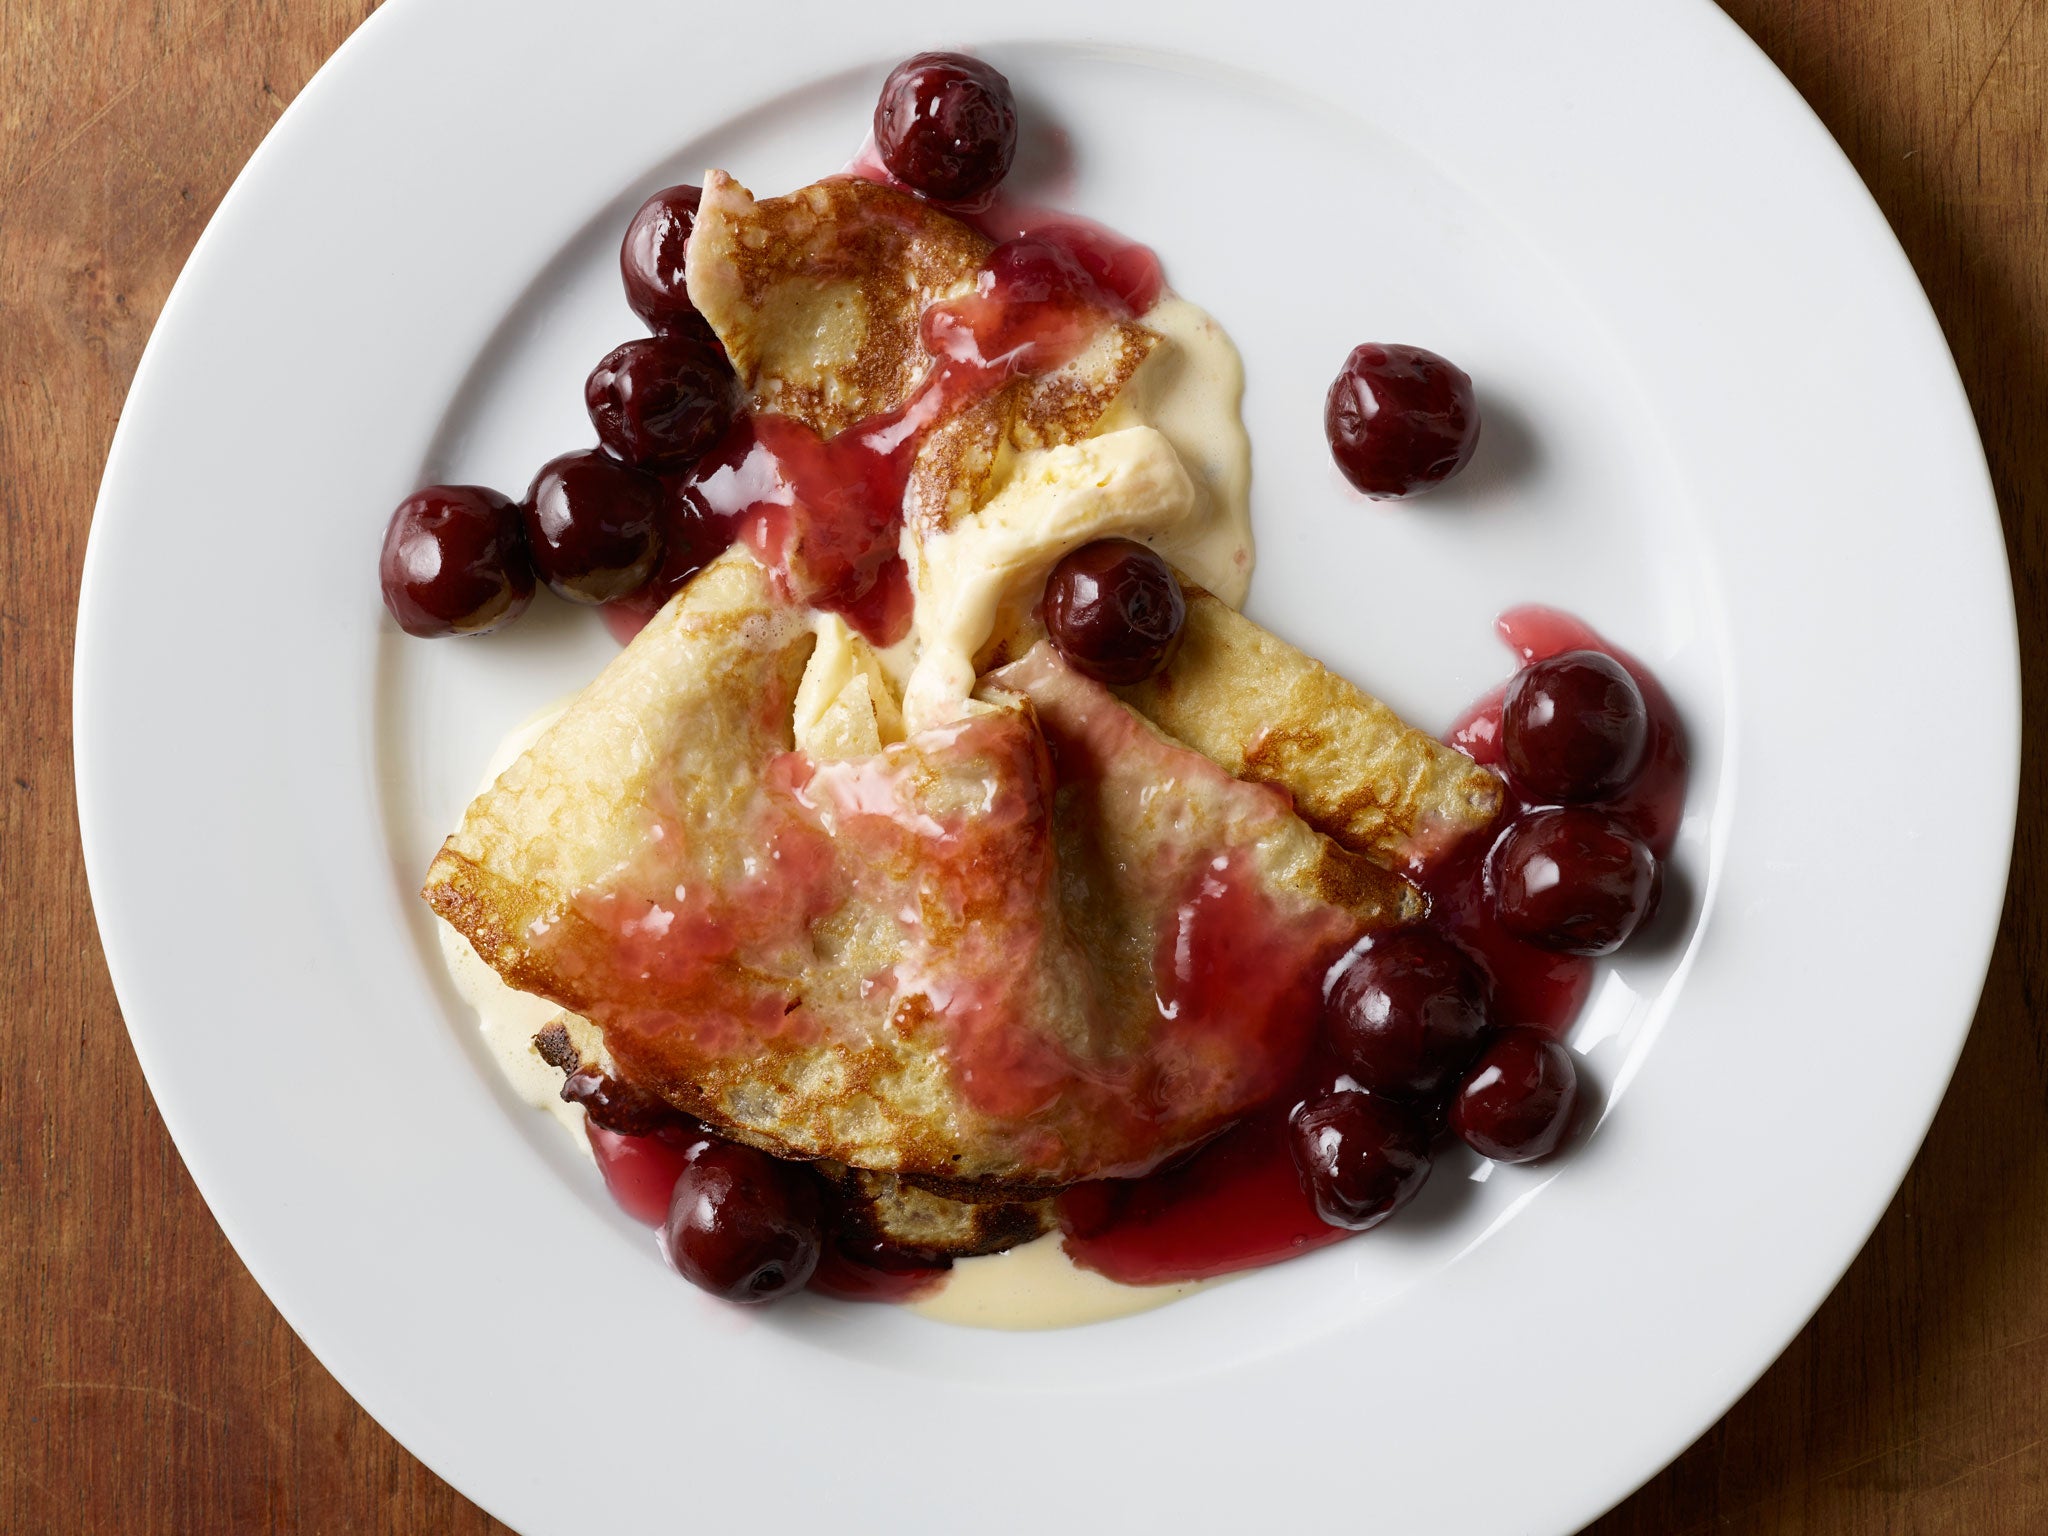 Fruity: Temperley pancakes are filled with ice-cream and topped with morello cherries